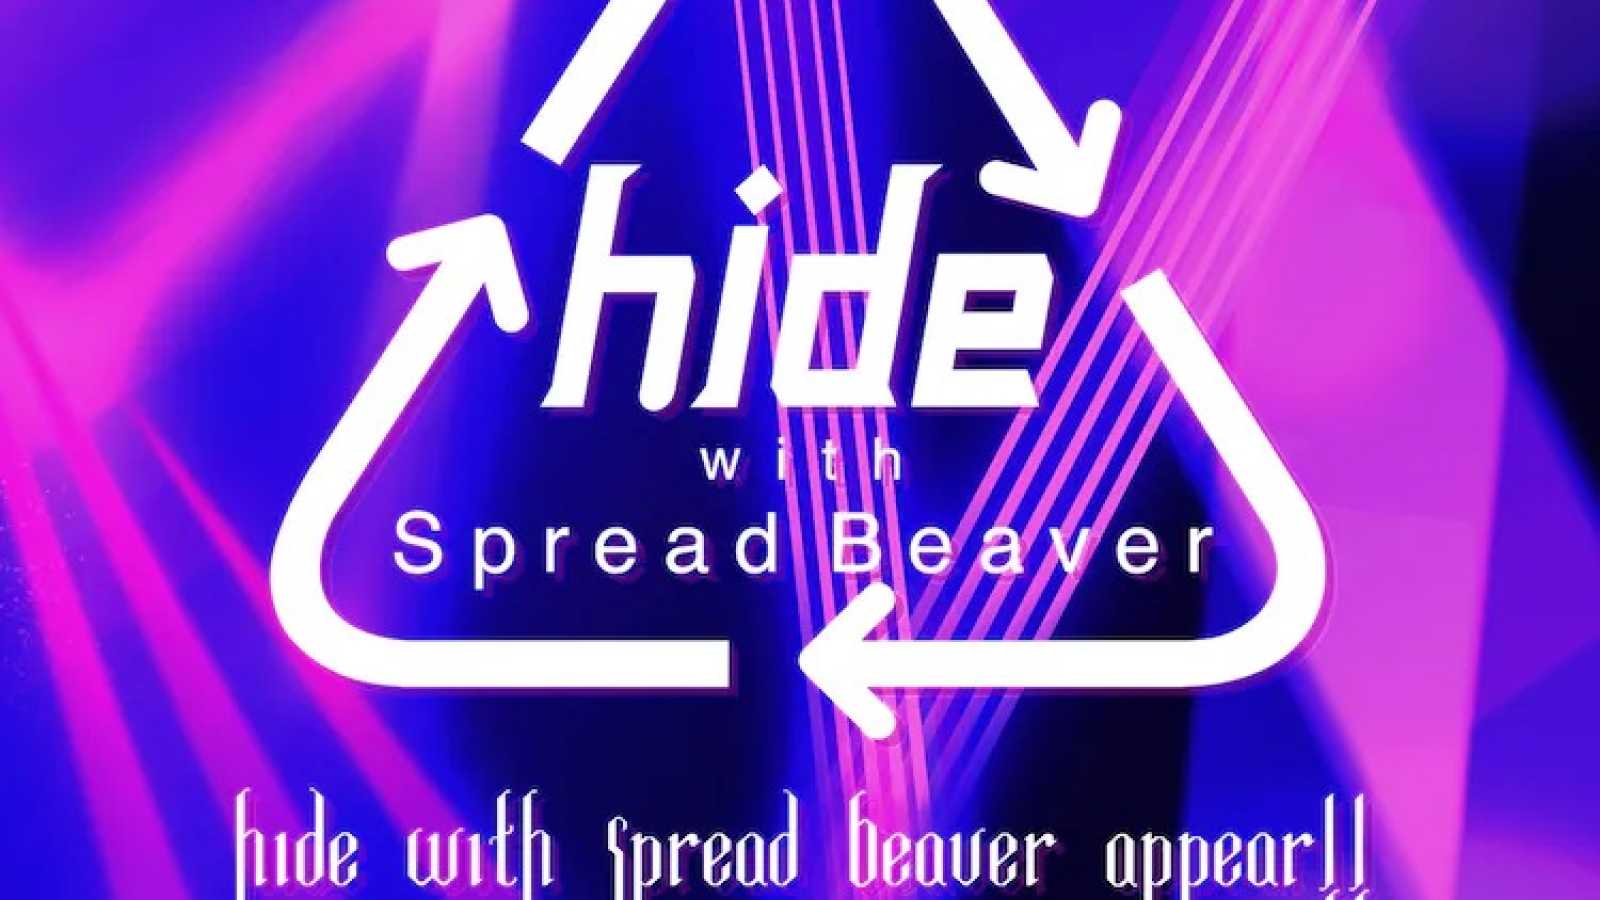 New Digital Live EP from hide with Spread Beaver © HEADWAX ORGANIZATION. All rights reserved.